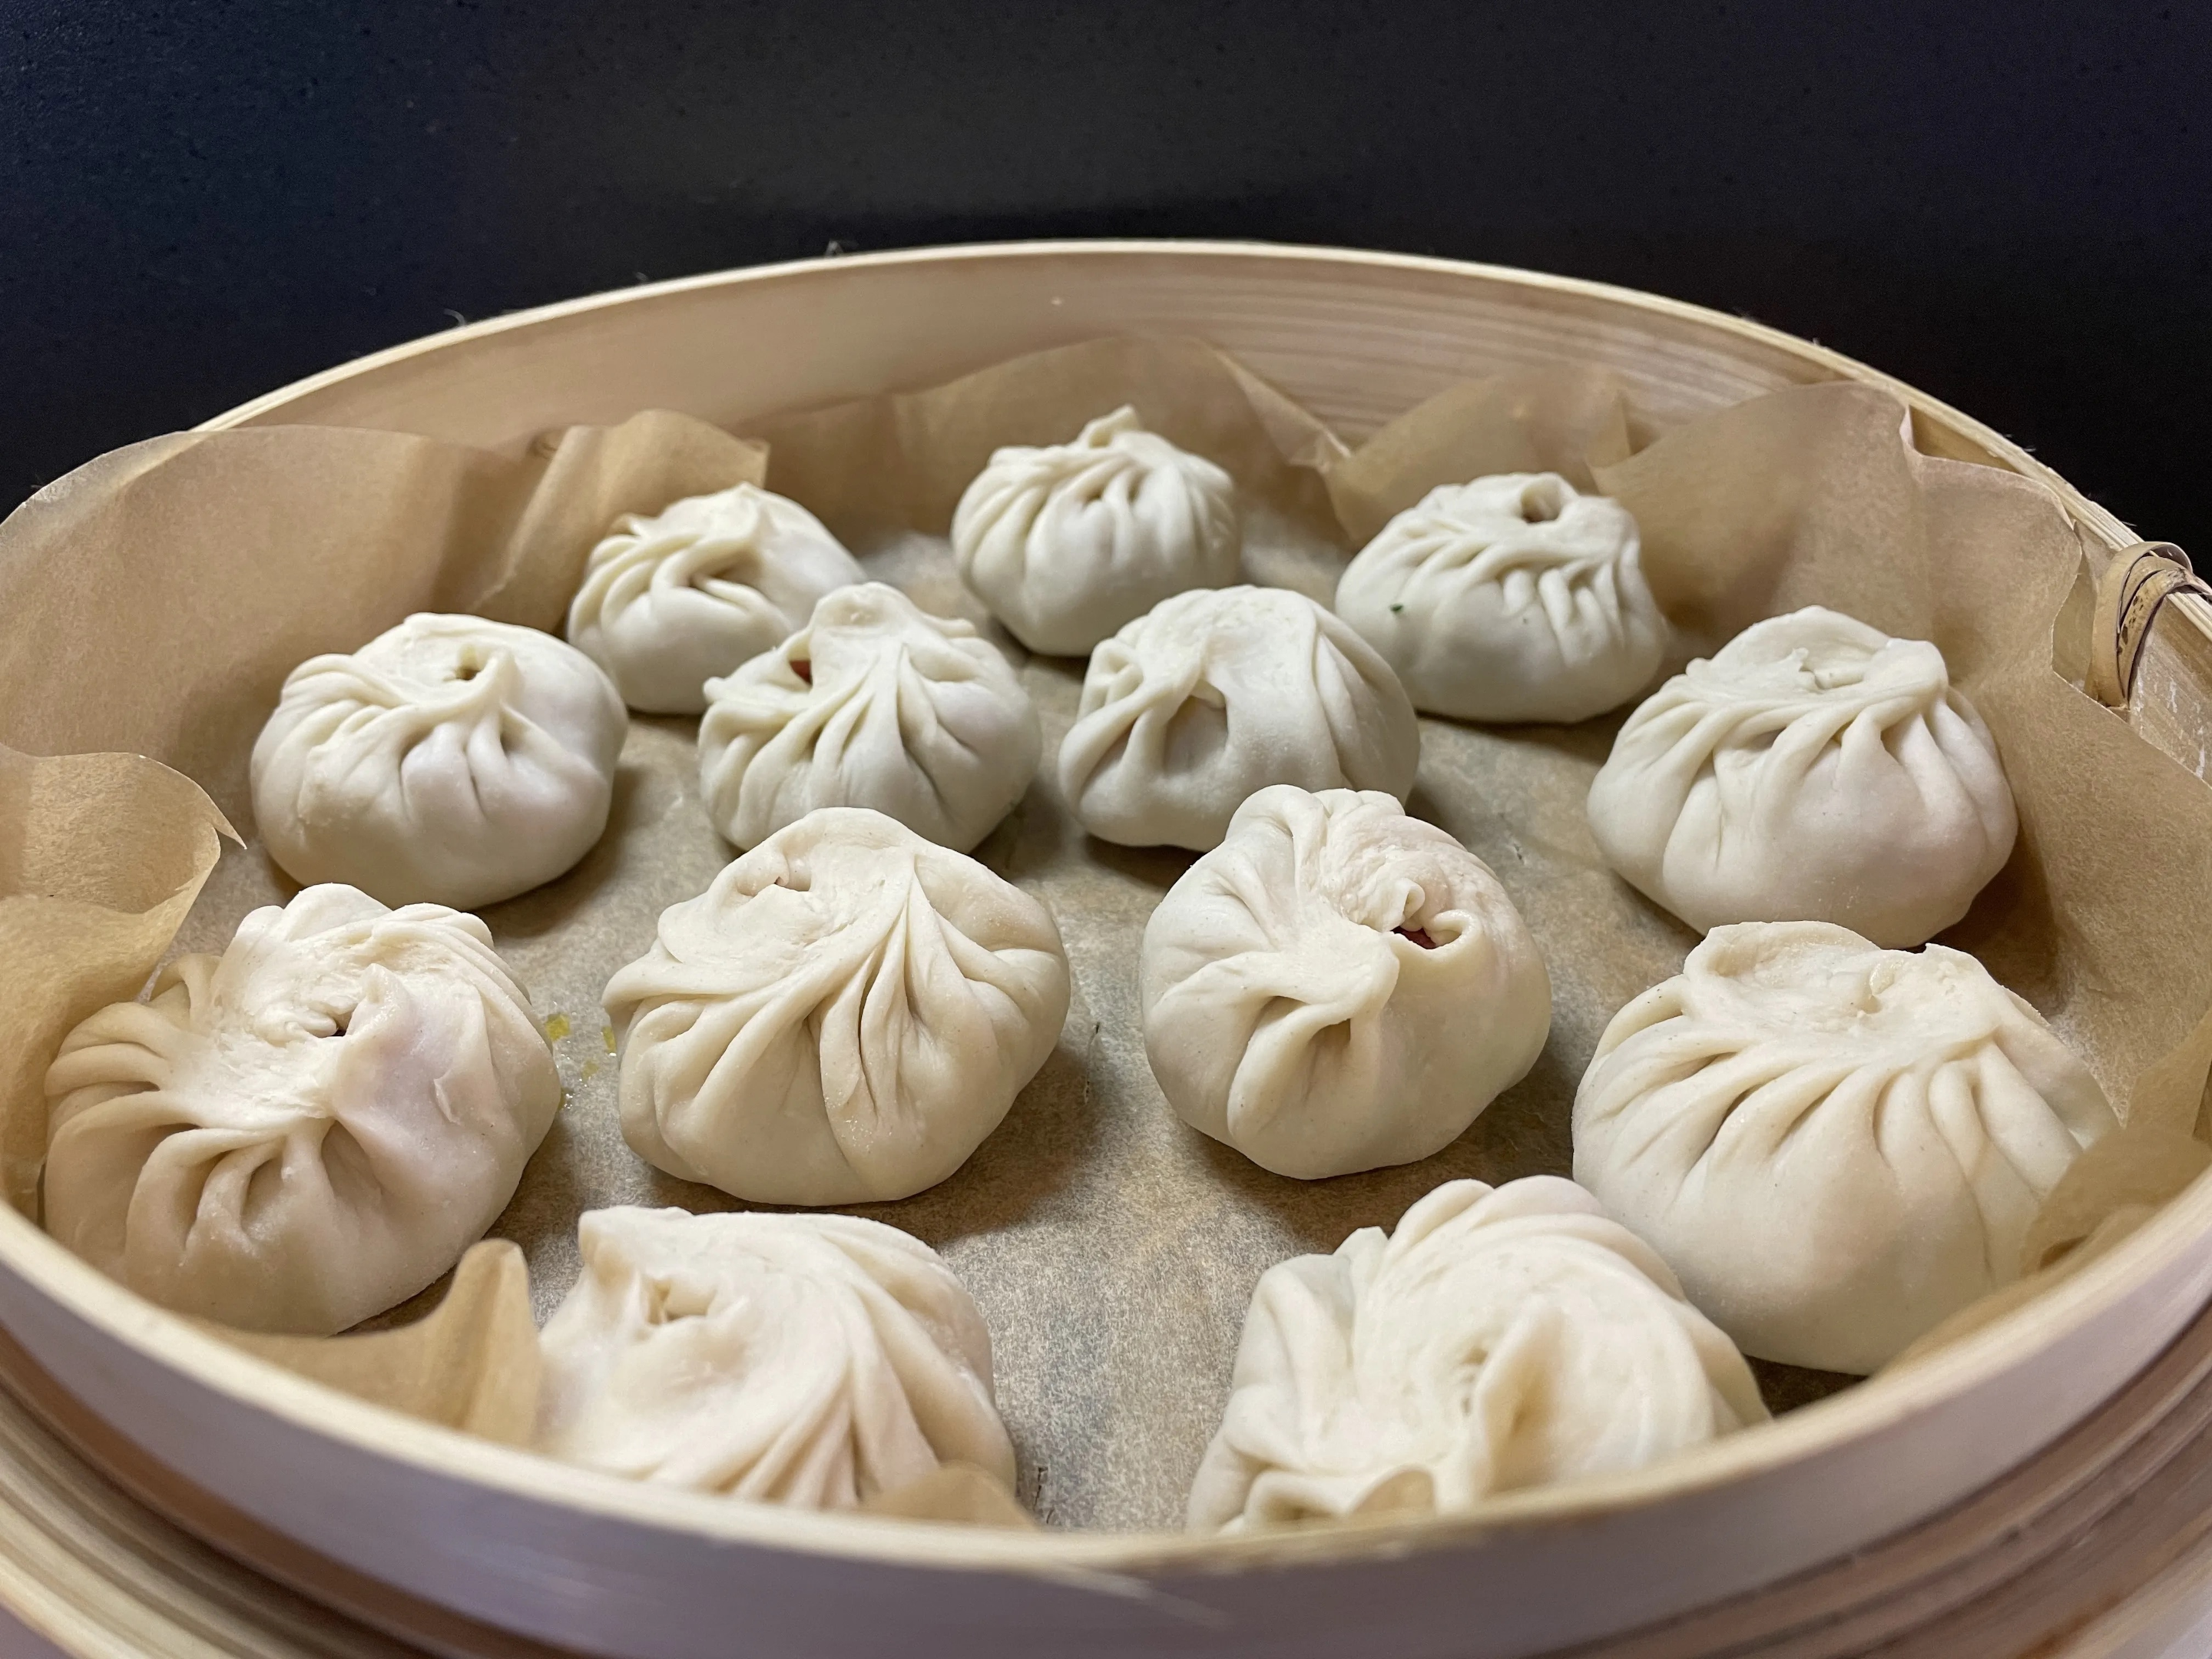 Buuz is Mongolia's most popular dish and a must try during any trip to Ulaanbaatar